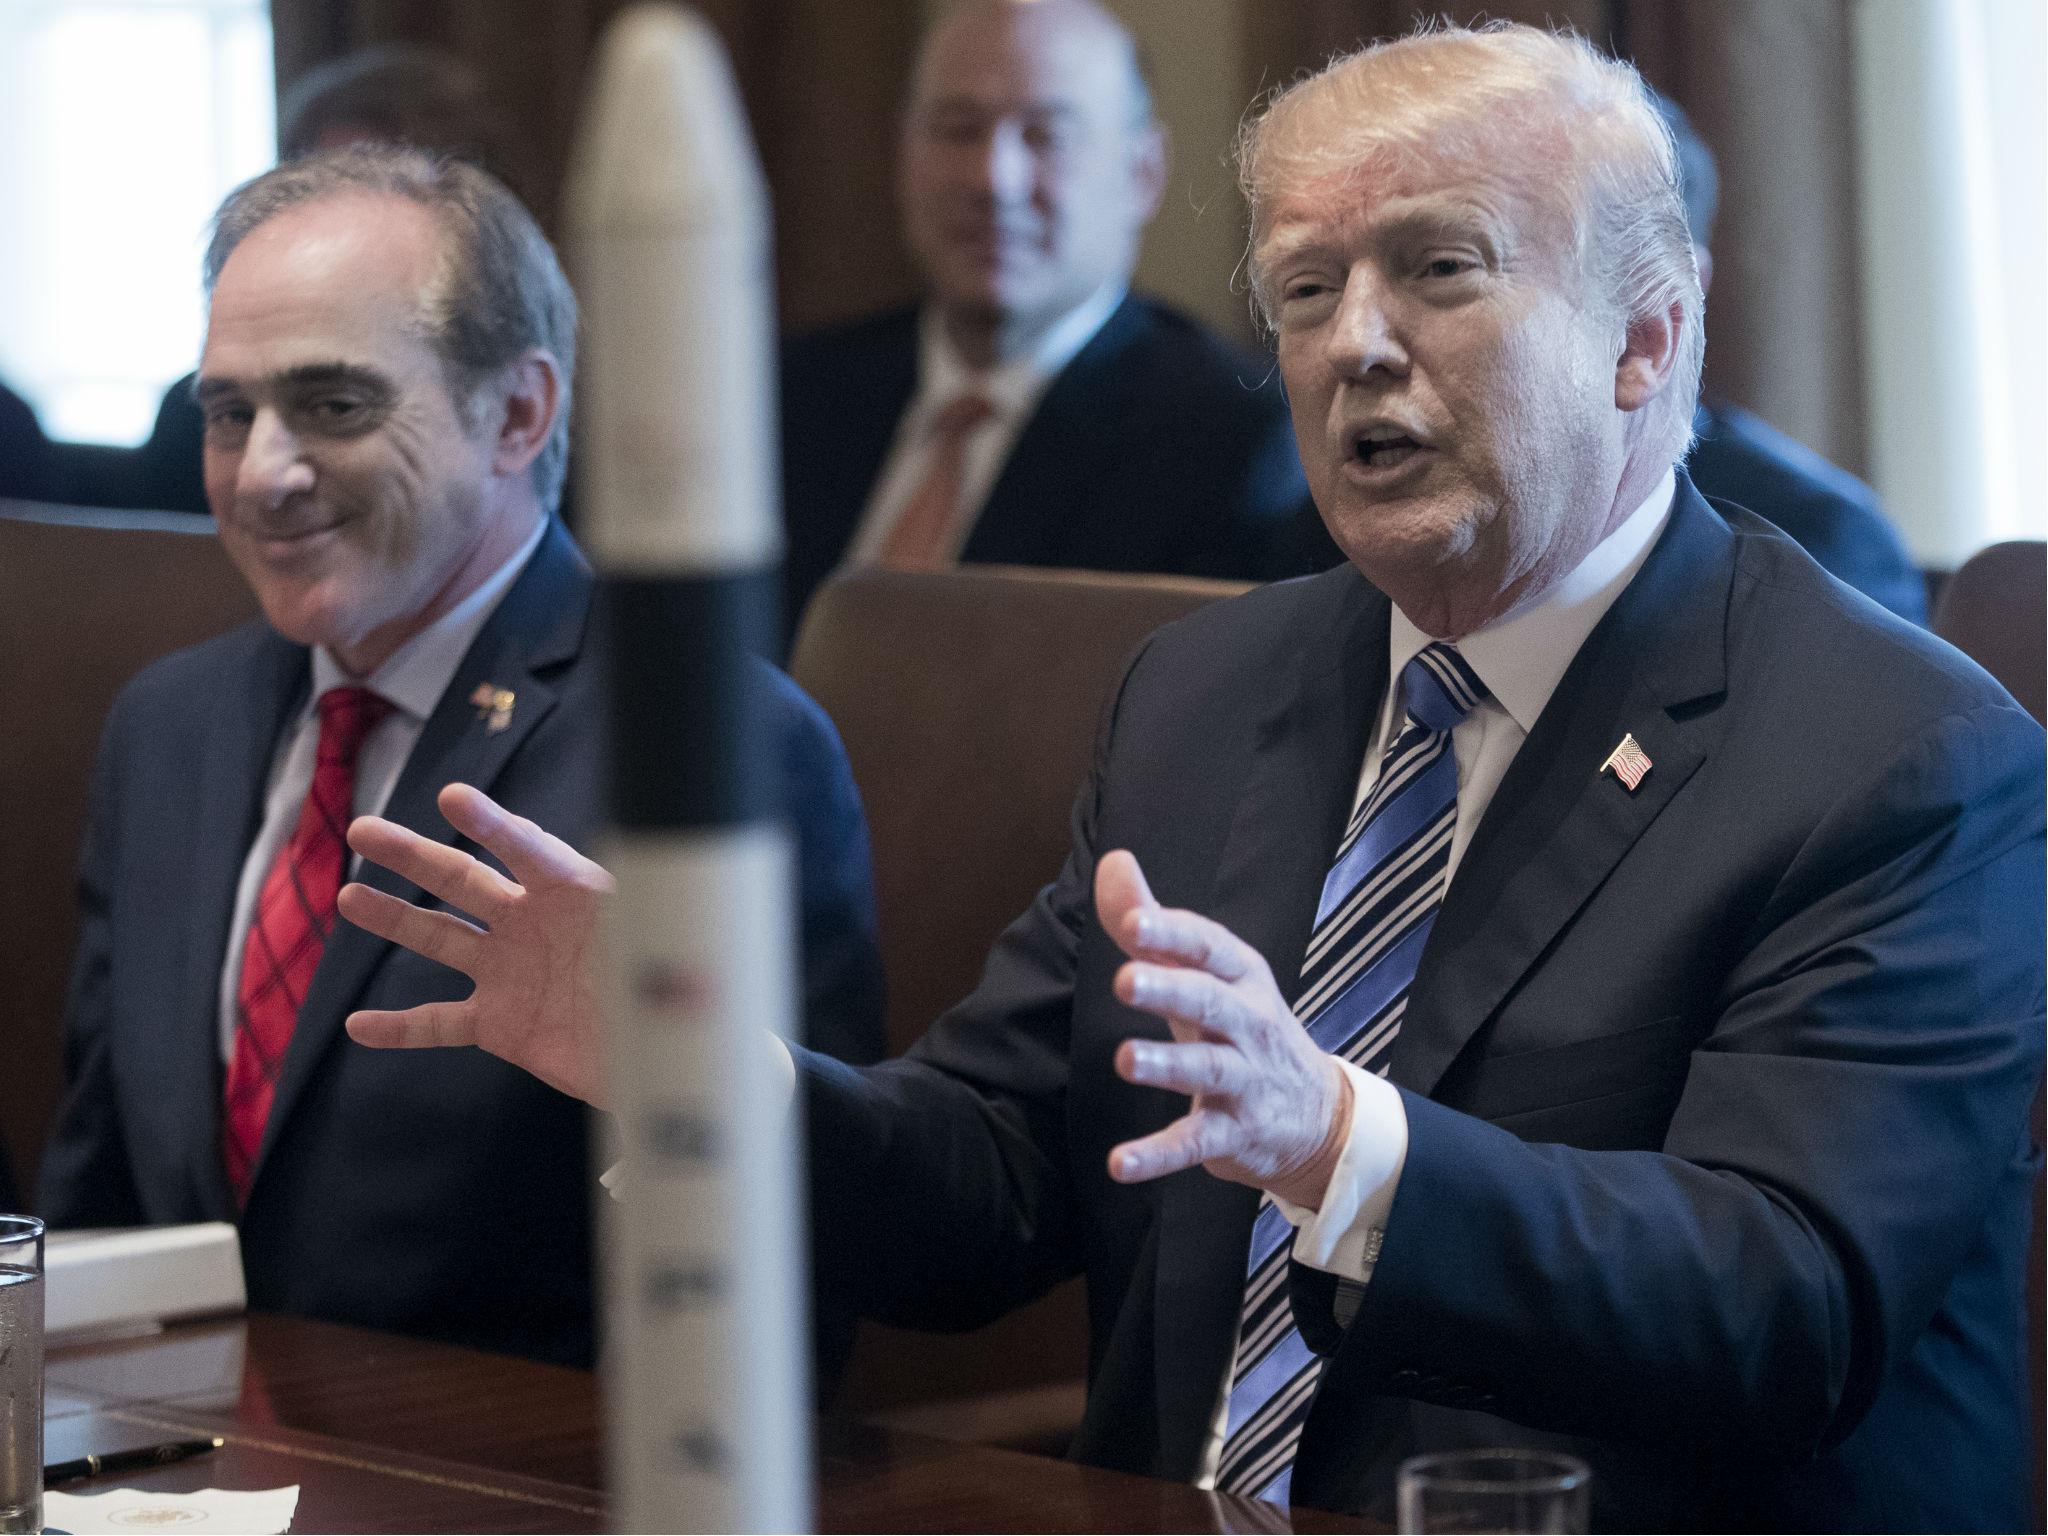 Mr Shulkin, at left, sitting next to the president during a cabinet meeting